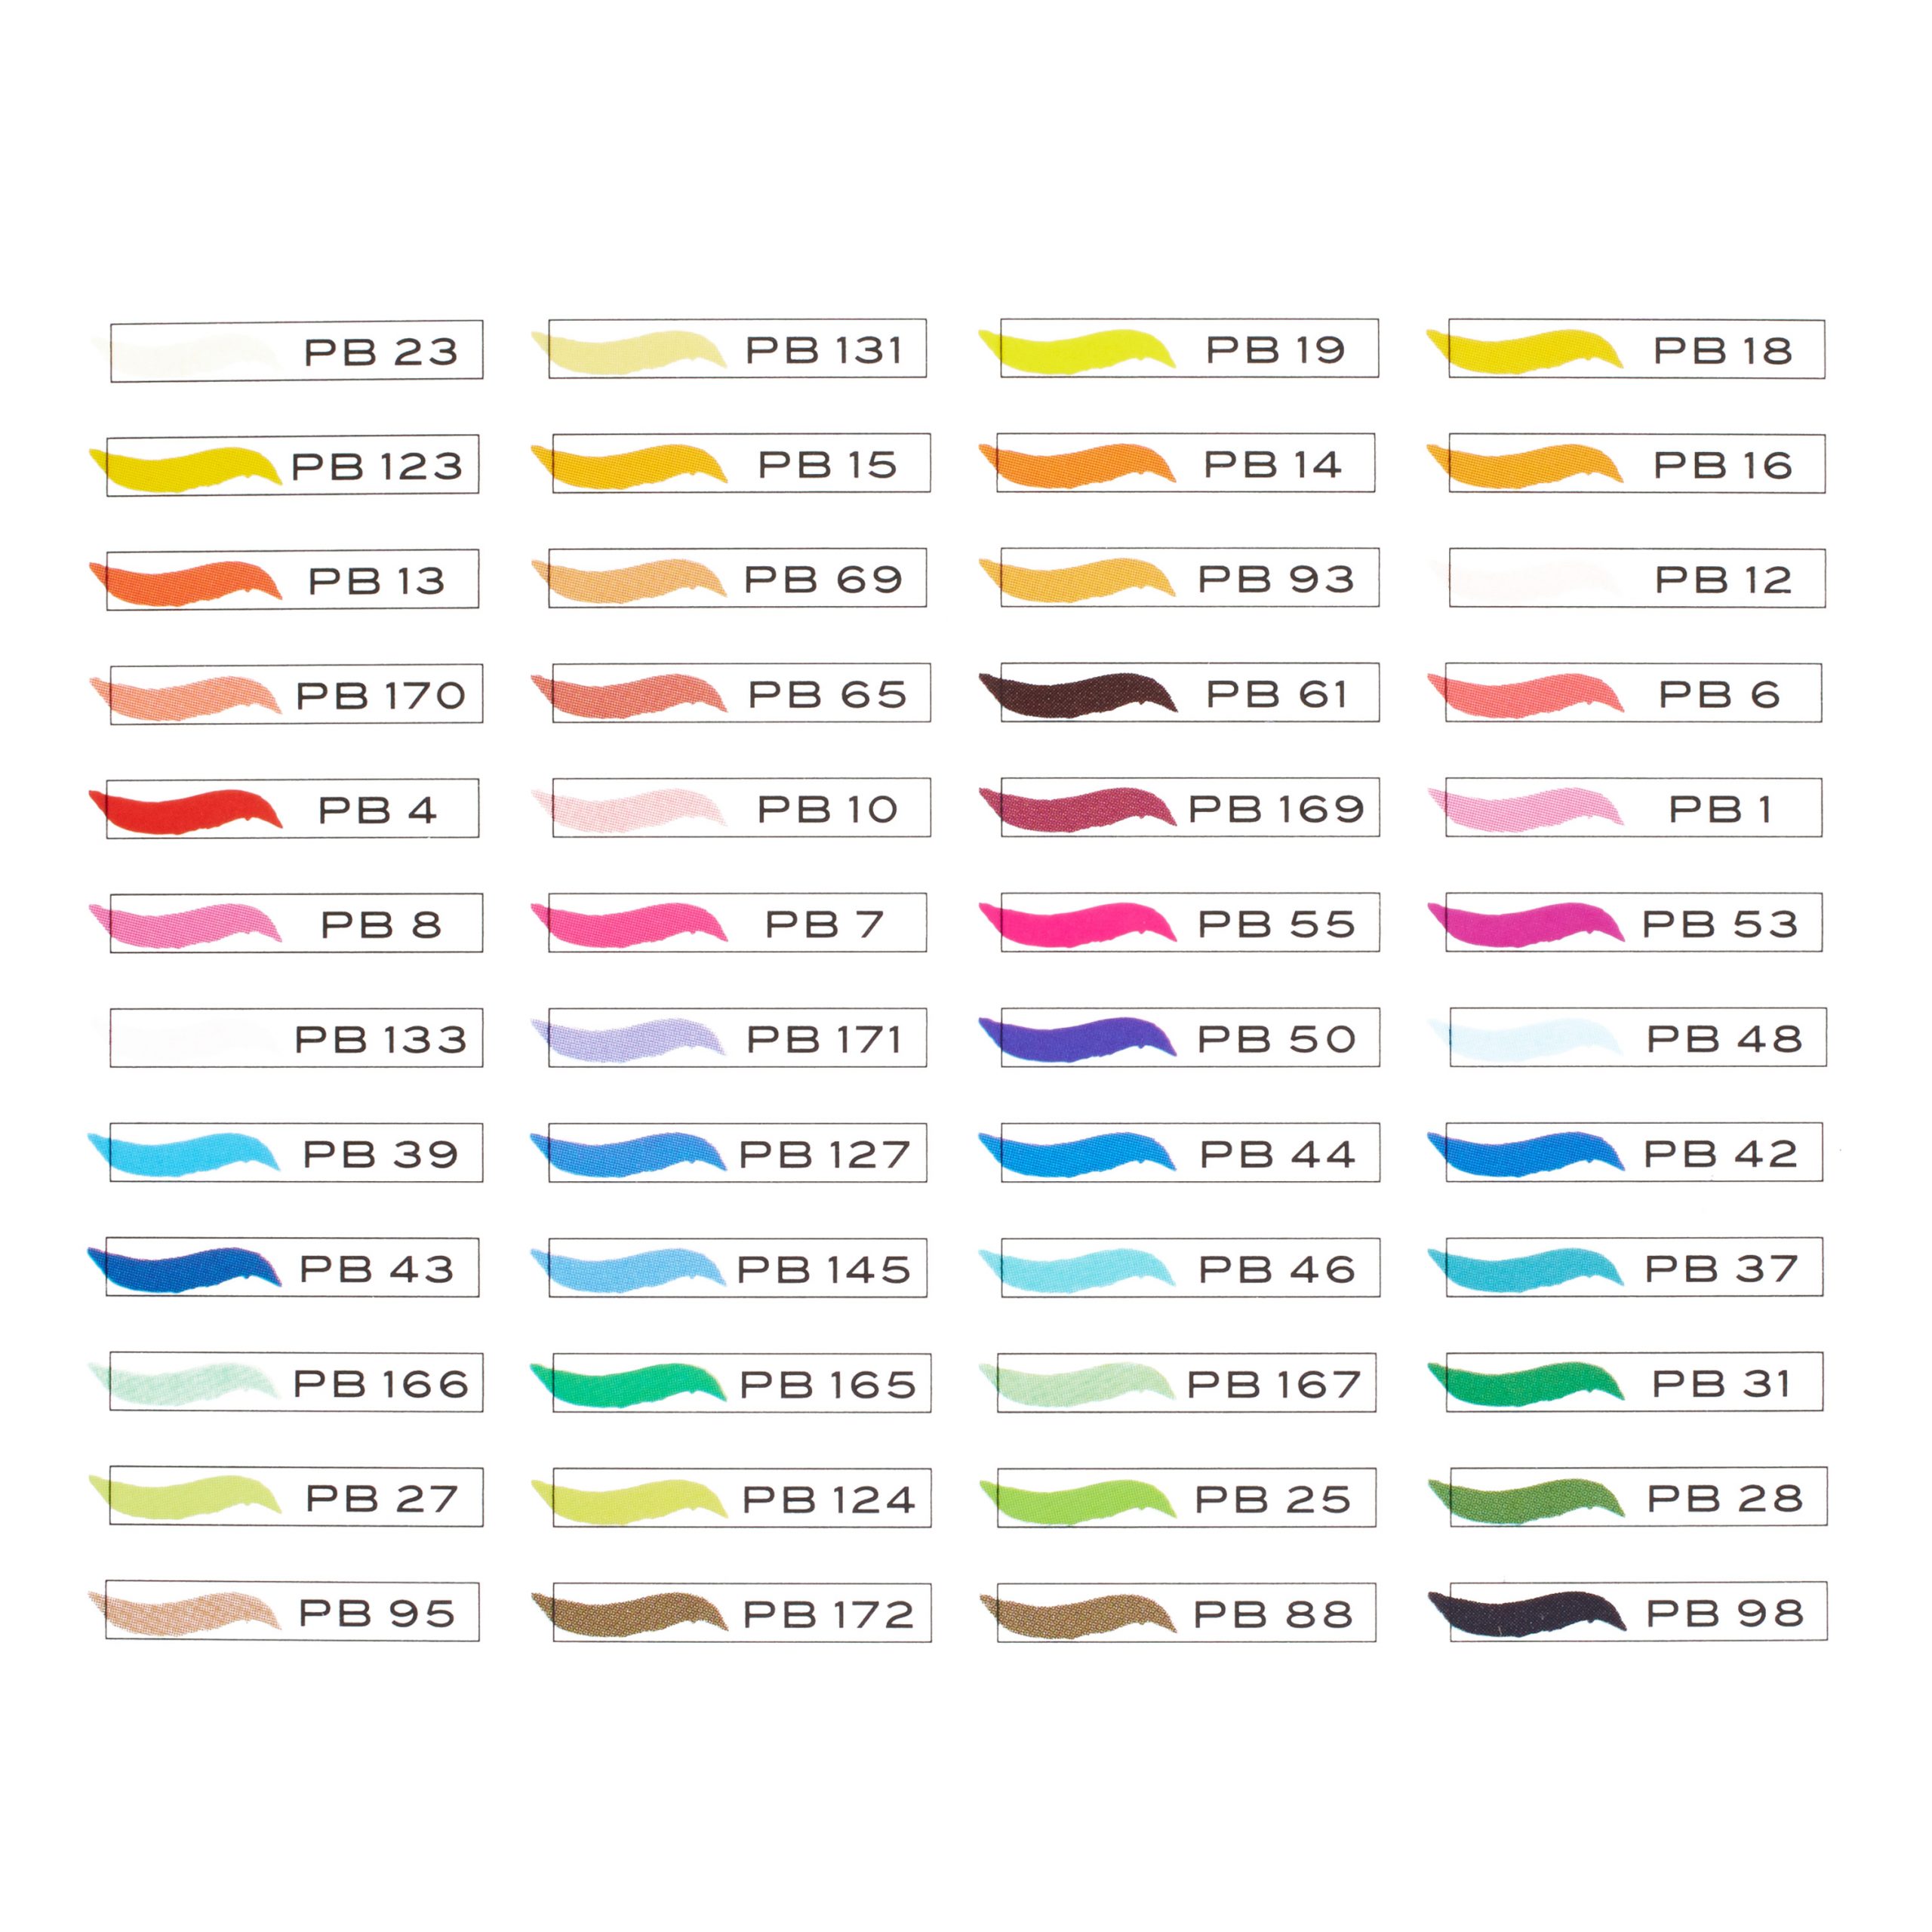 1776354-prismacolor-markers-premierbrush-package-colorkey